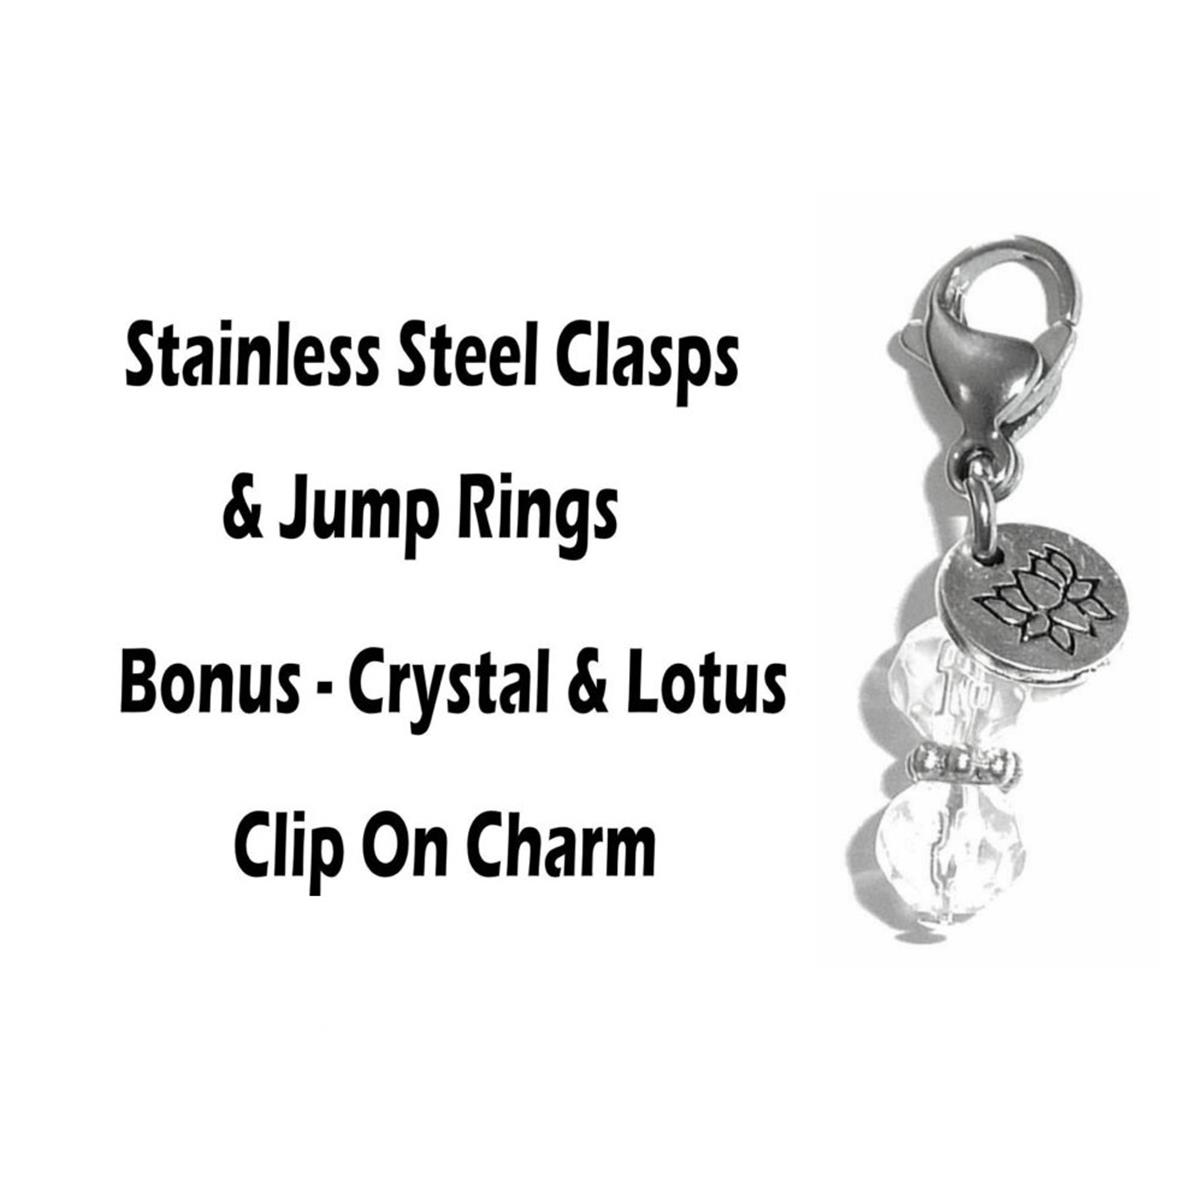 4 Pack With God Clip On Charms - Inspirational Charms Clip On Anywhere